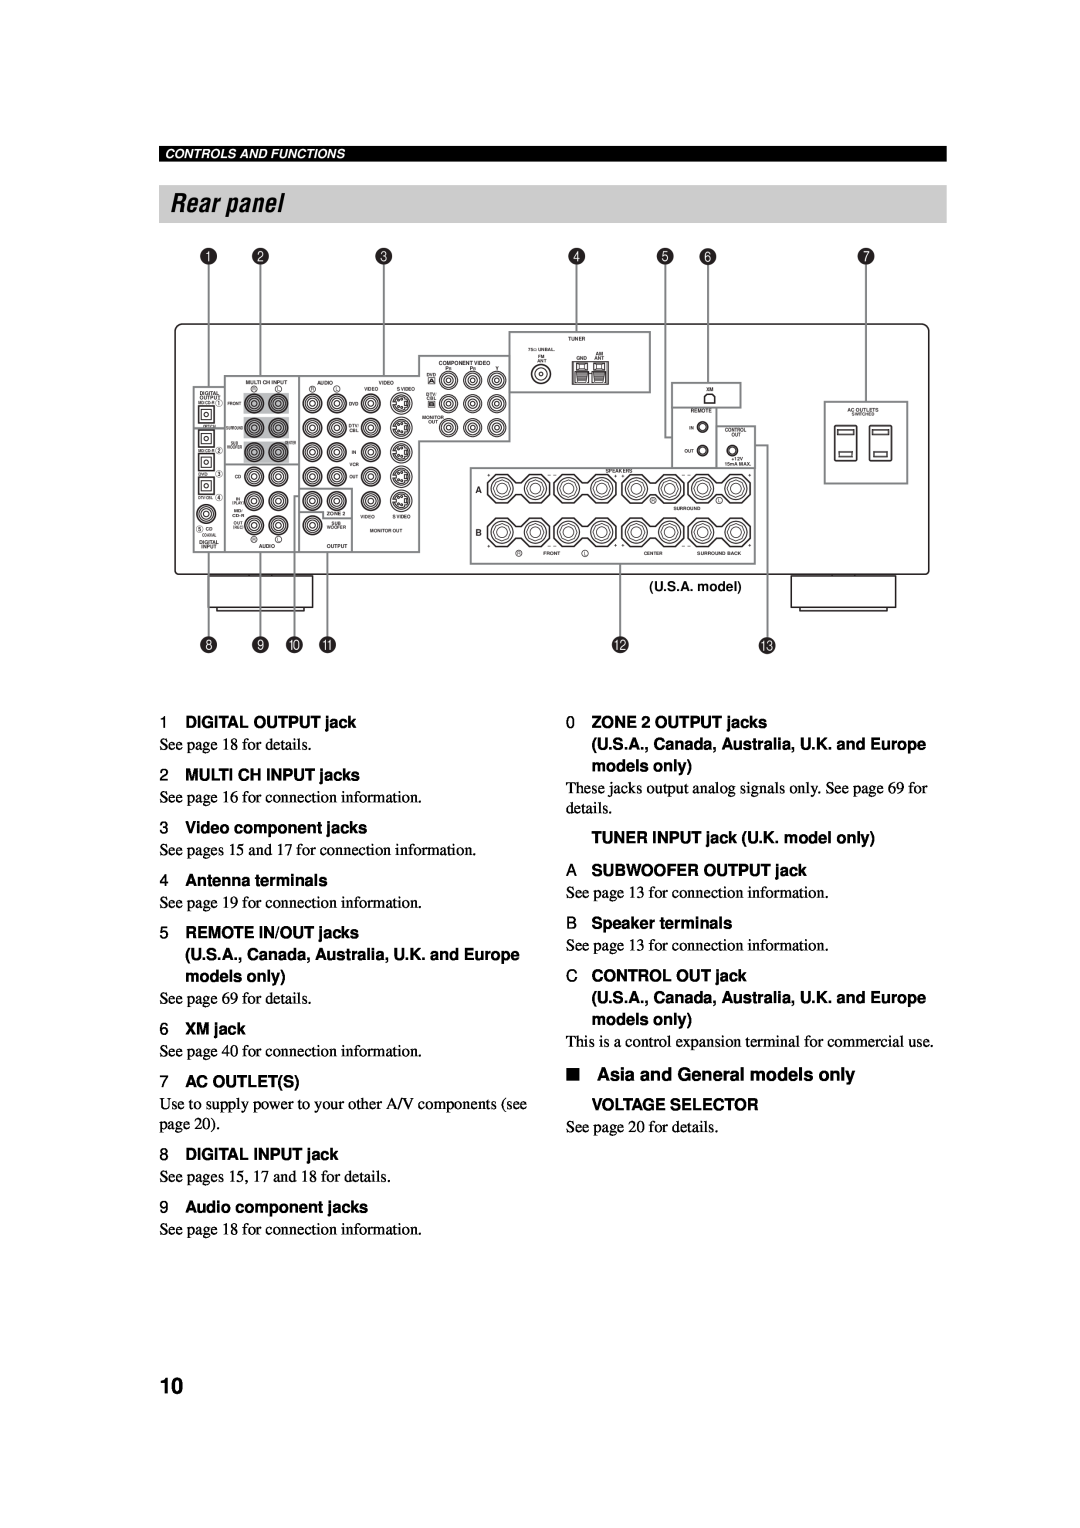 Yamaha AV Receiver owner manual Rear panel, Asia and General models only, 8 9 0 A 